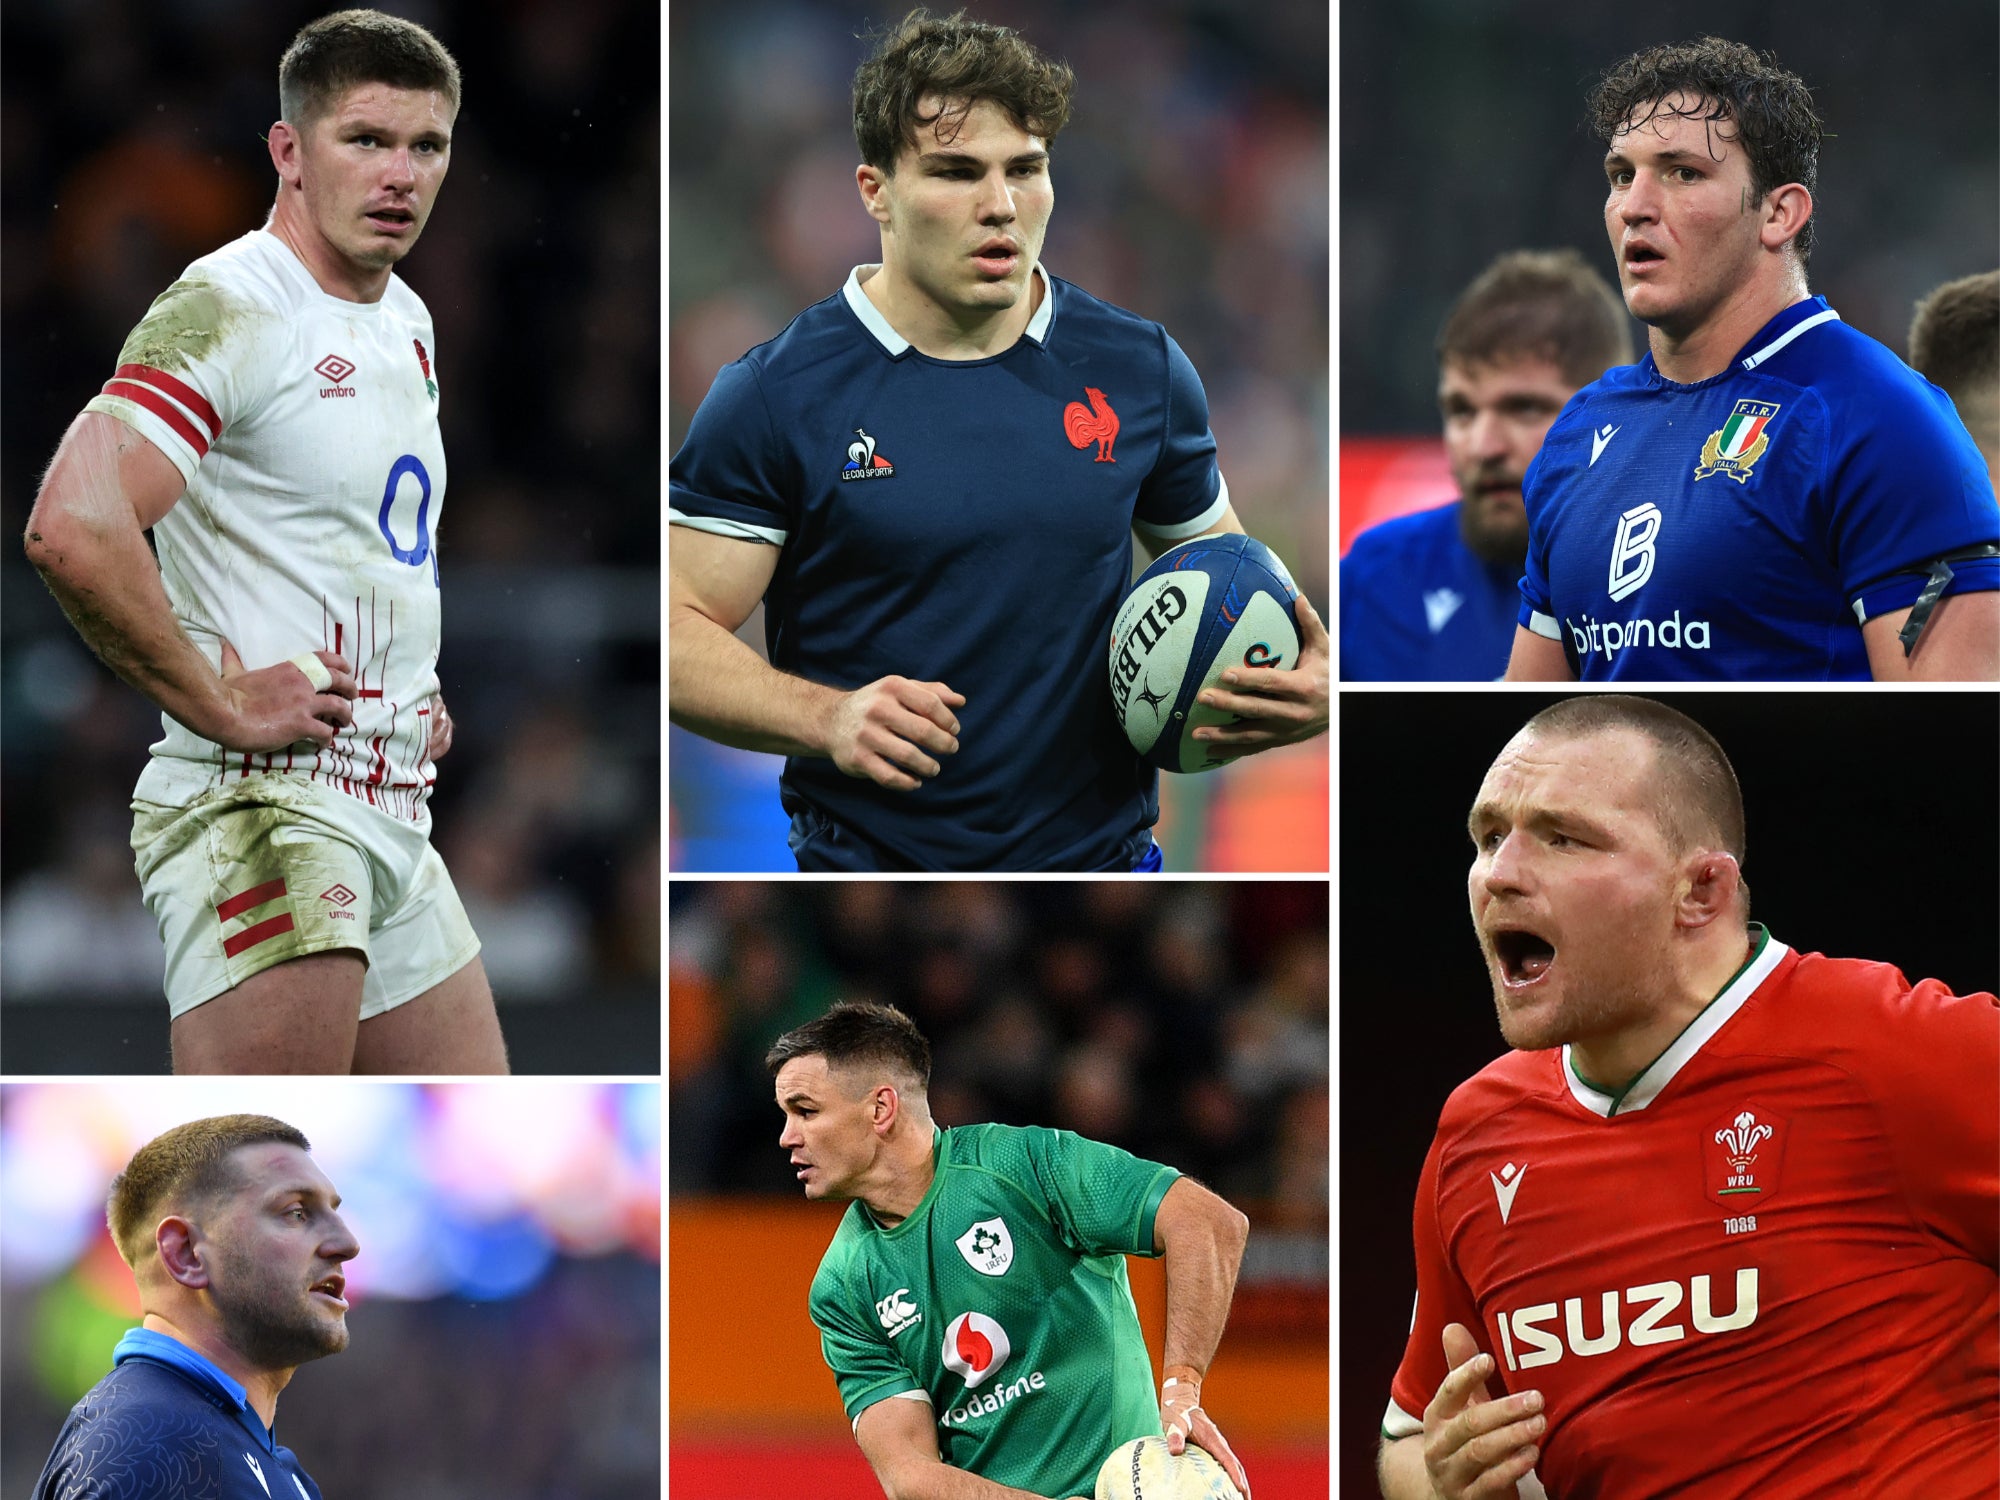 The Six Nations culminates on Saturday 18 March